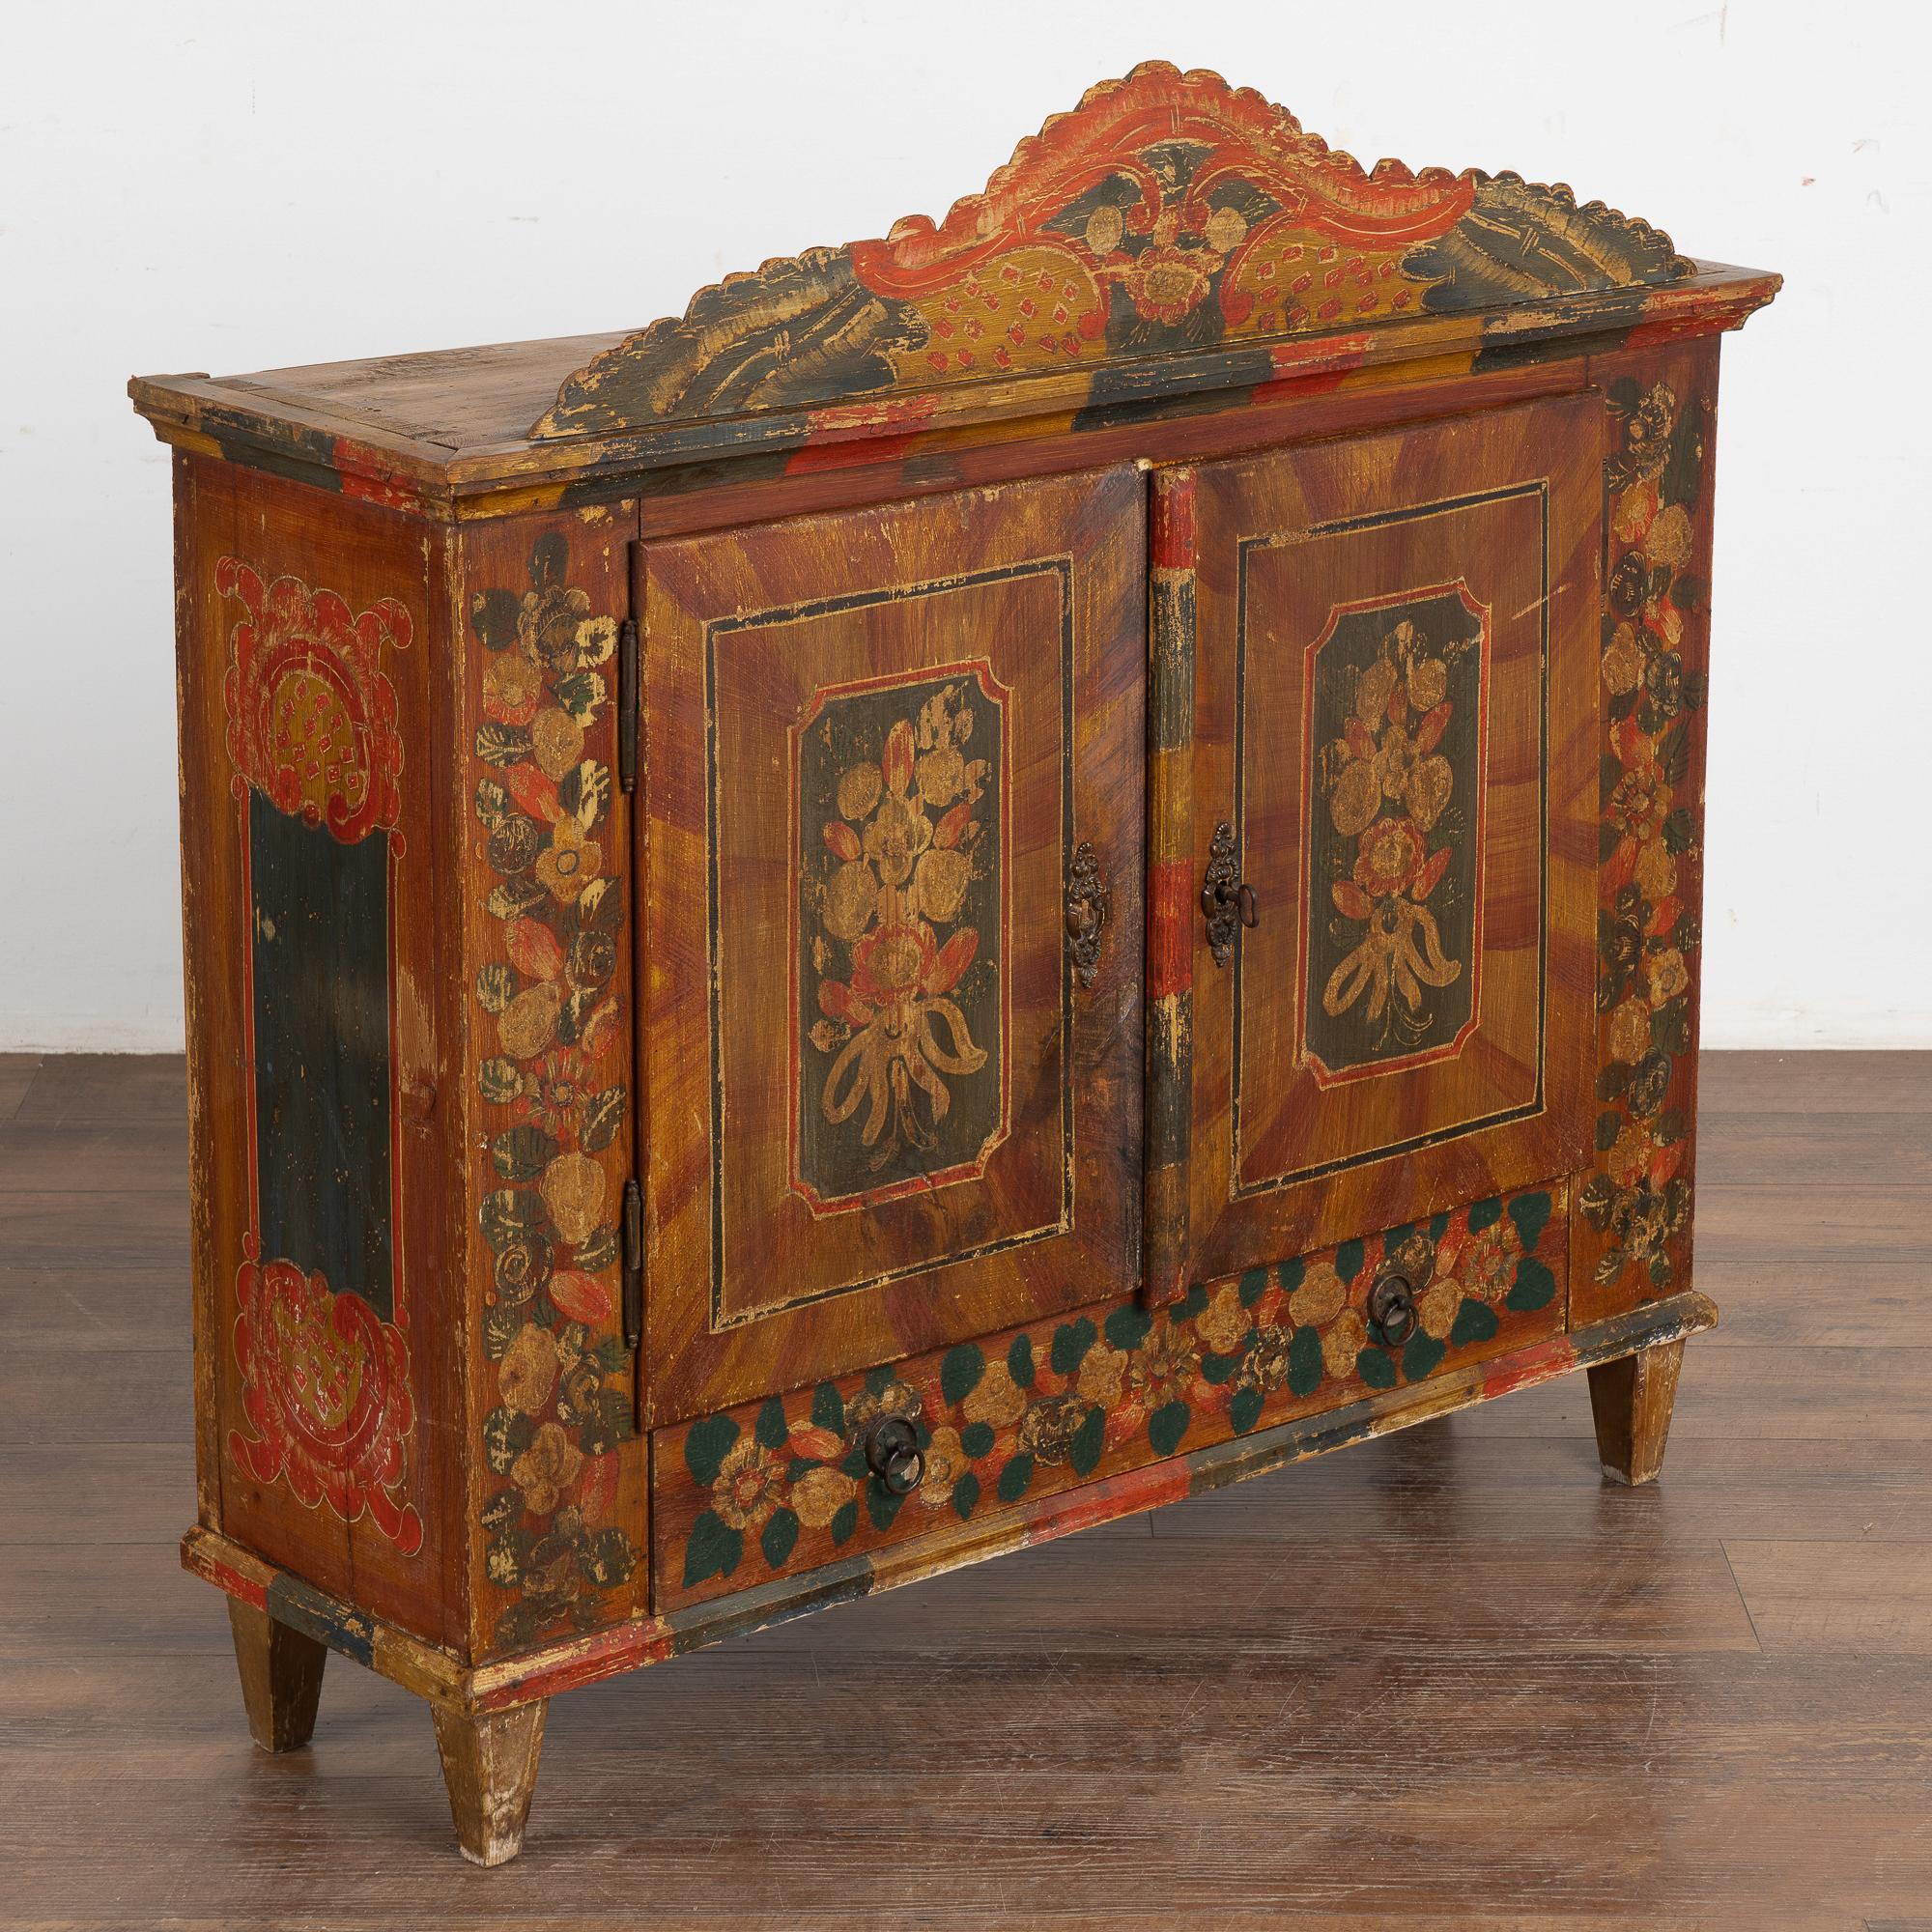 The colorful painted finish is all original on this delightful small cabinet from Austria resting on tapered feet. 
Tones of orange, red, brown, yellow, ocher and green are all blended in the hand-painted florals and flourishes that are seen